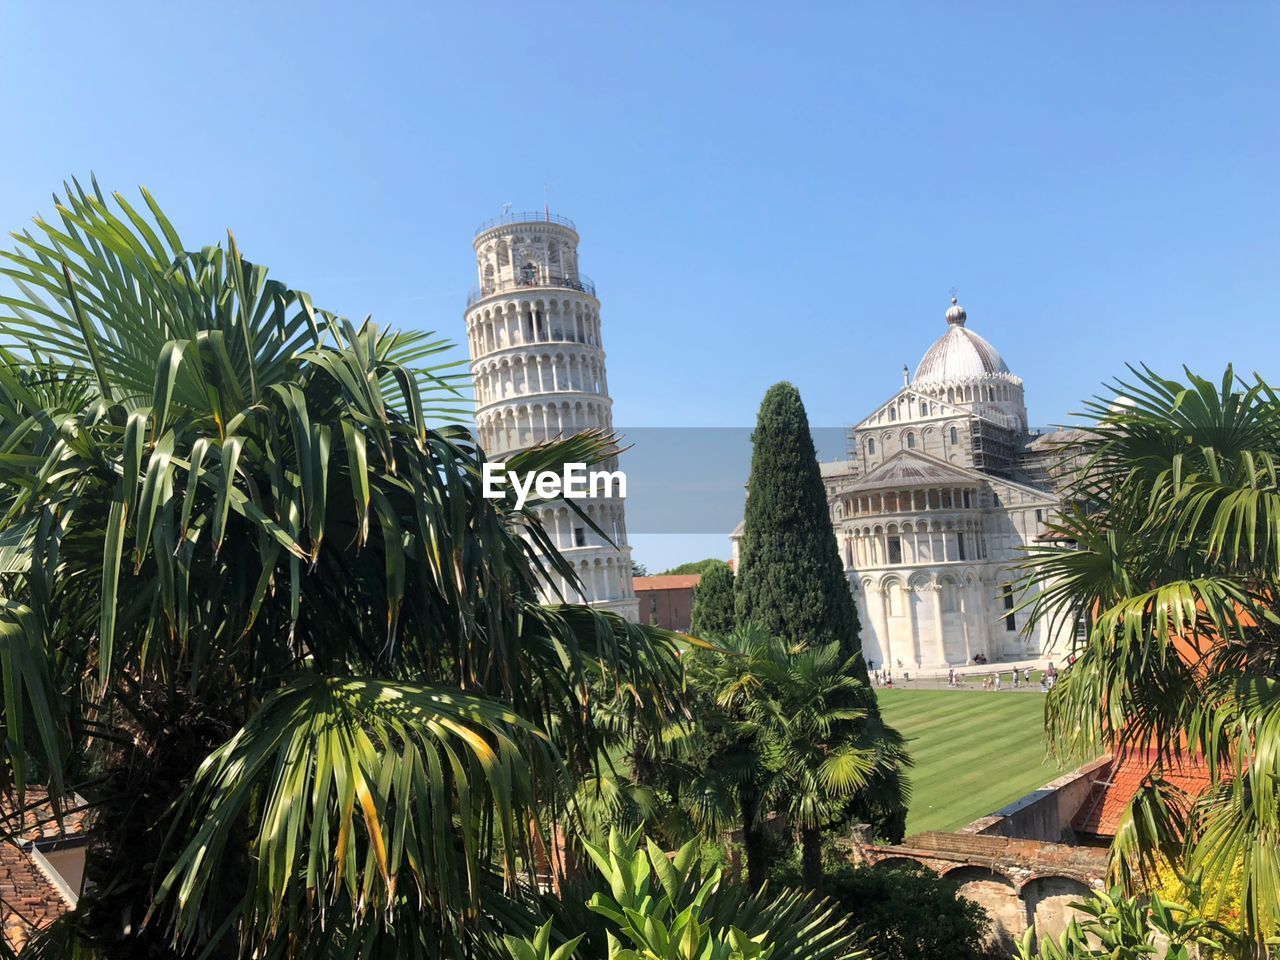 Leaning tower of pisa and cattedrale di pisa